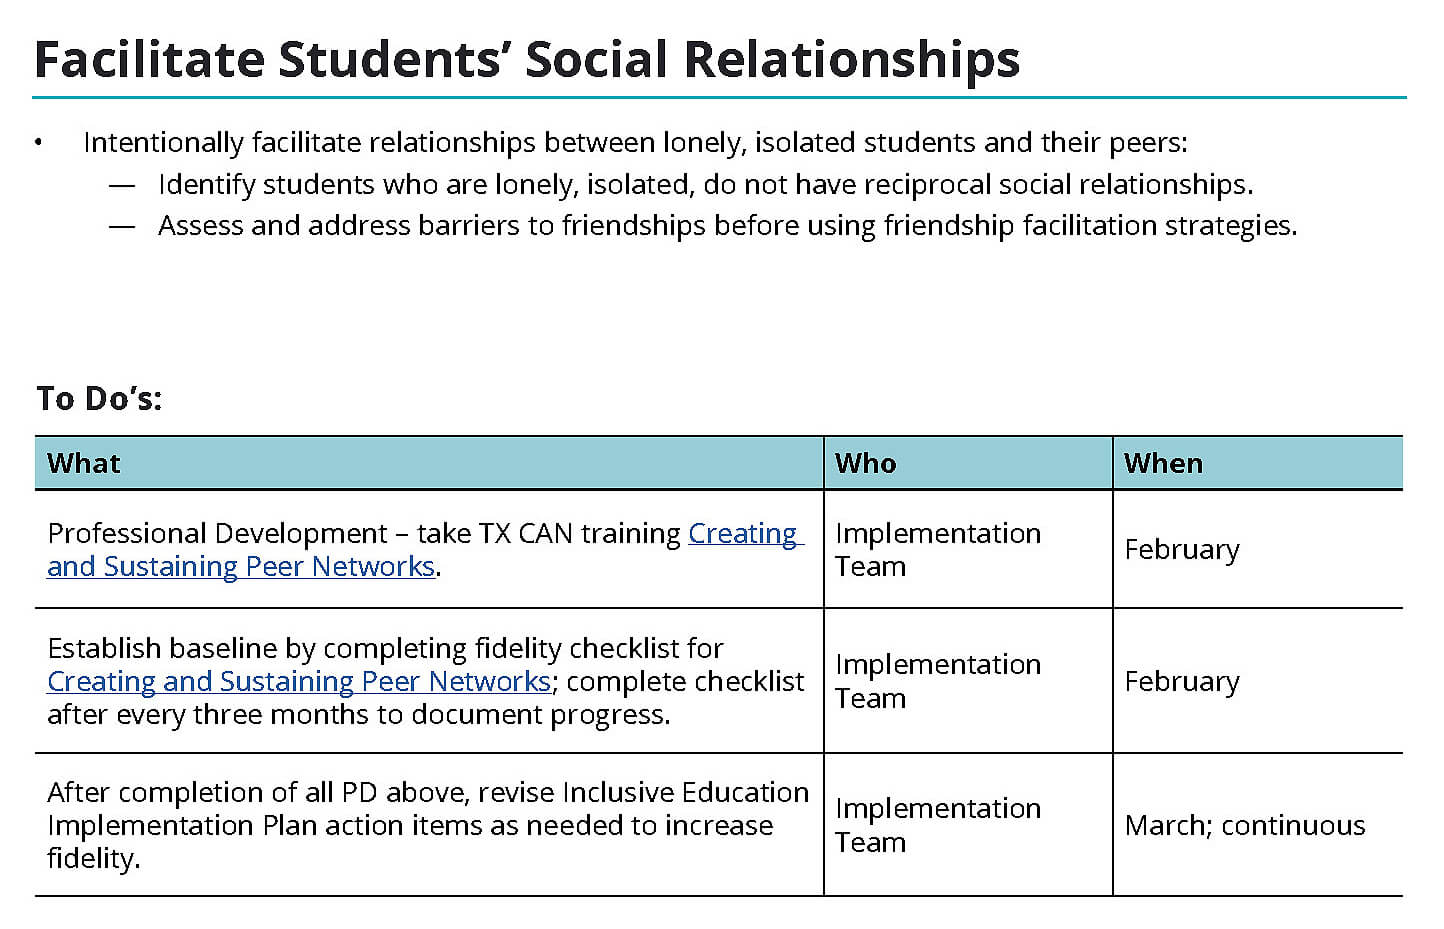 Screenshot of "Sample Phase One Inclusive Education Implementation Plan, Facilitate Students' Social Relationships"